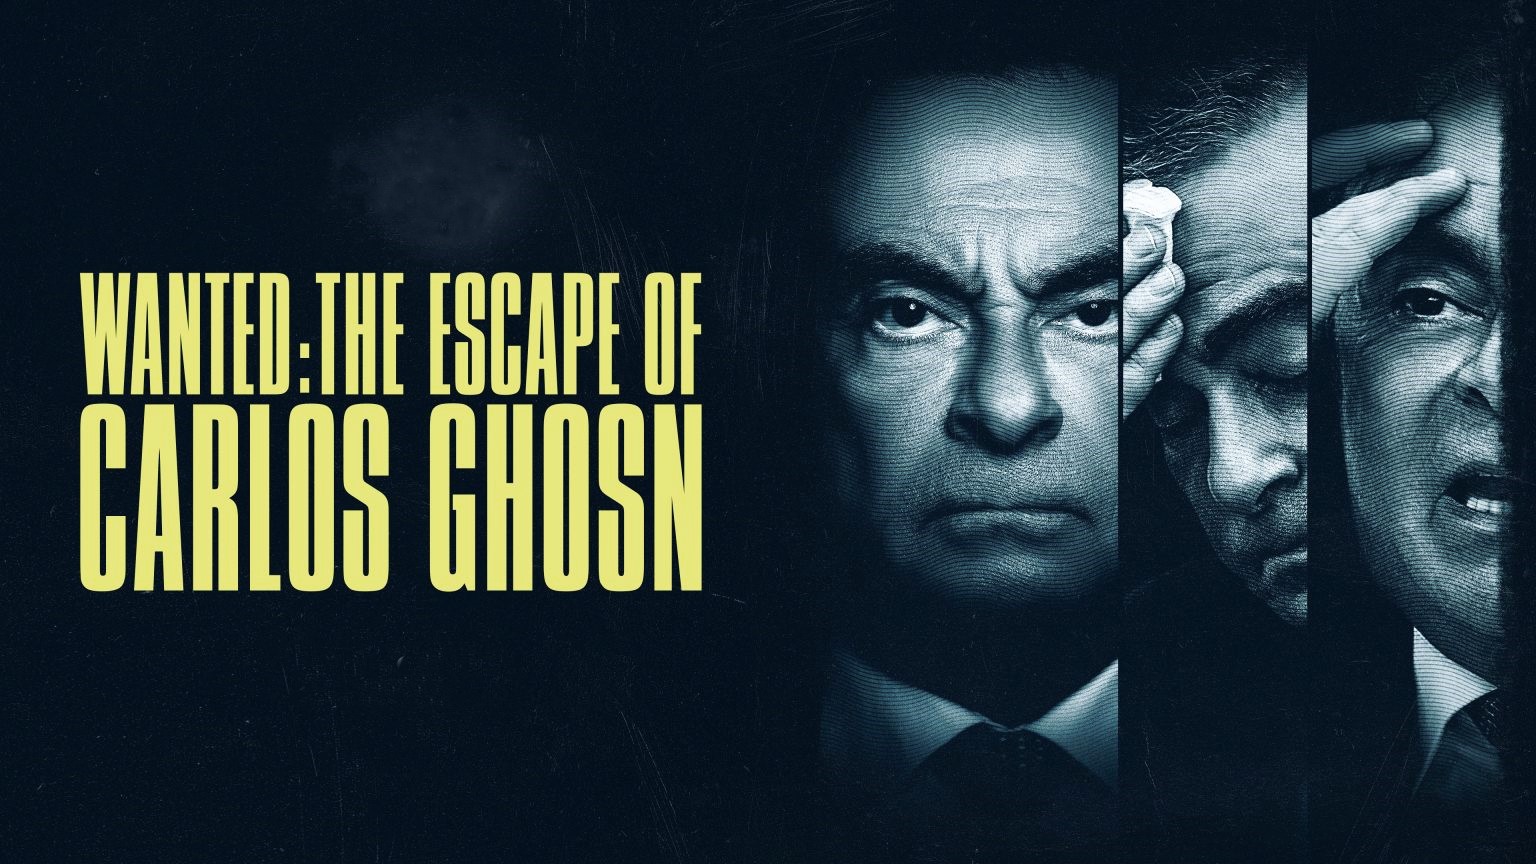 Is Wanted The Escape Of Carlos Ghosn Based On A True Story